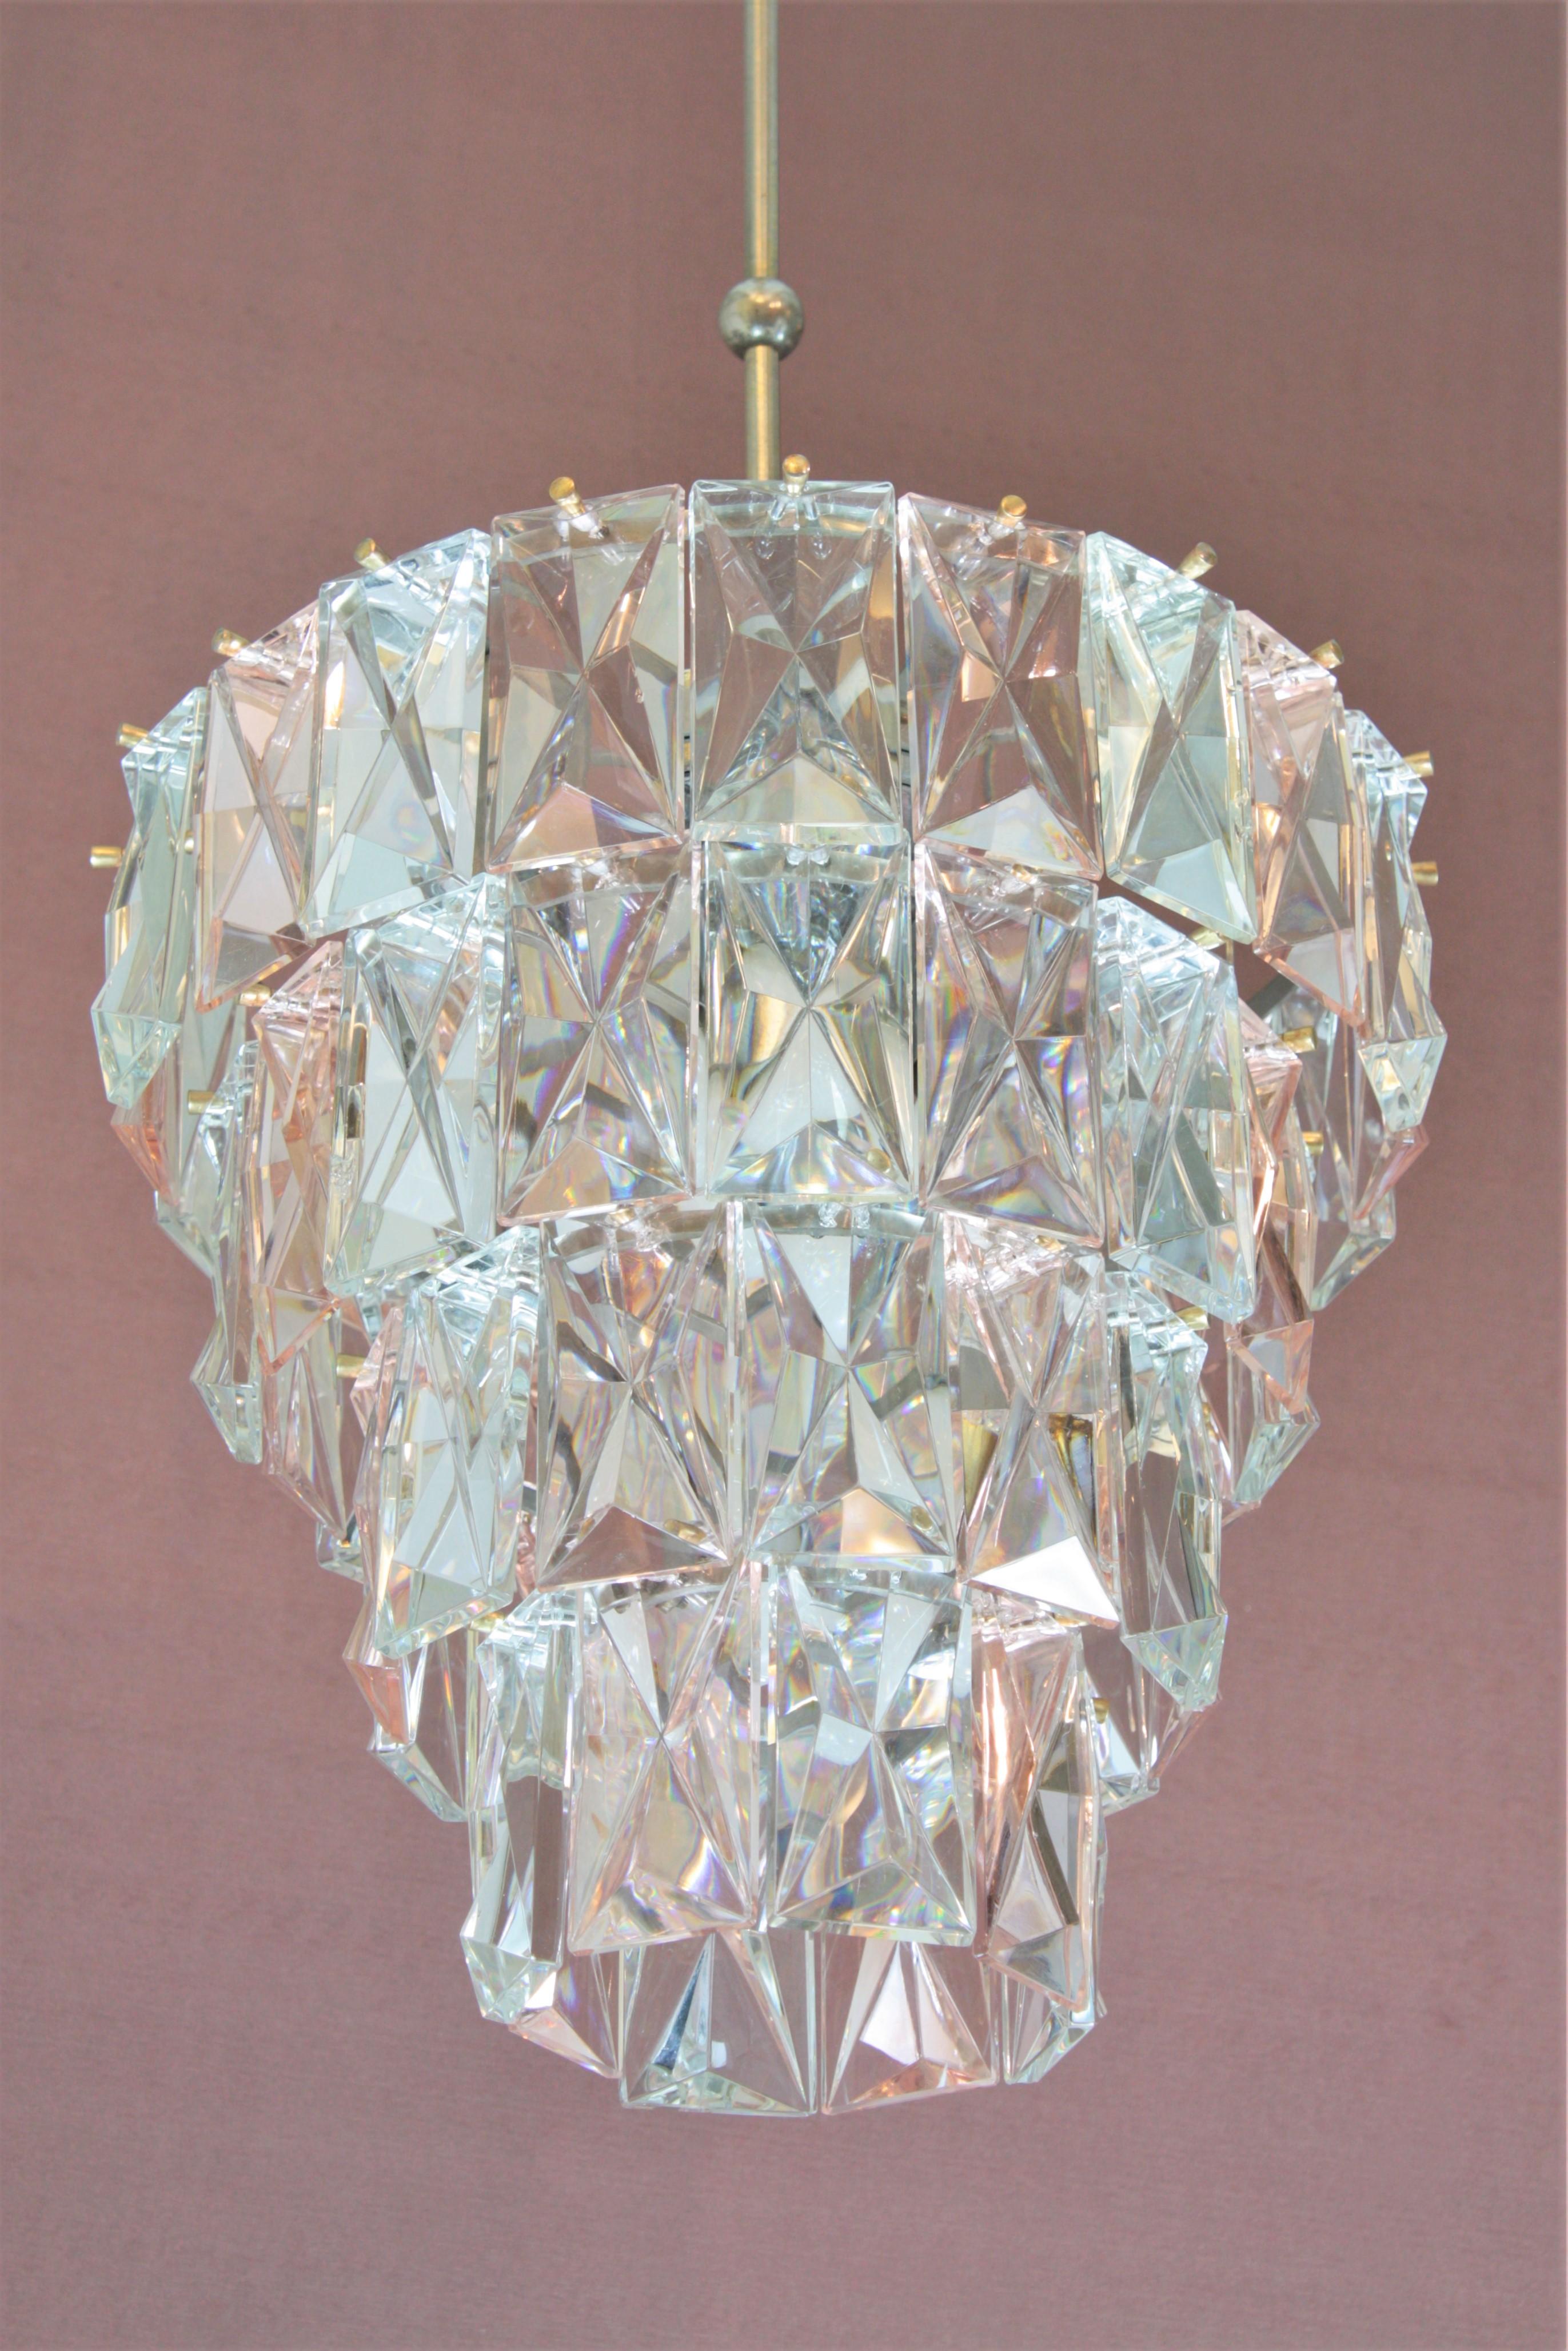 Midcentury Kinkeldey Chandelier in Pink and Clear Faceted Crystal, 1960s For Sale 4